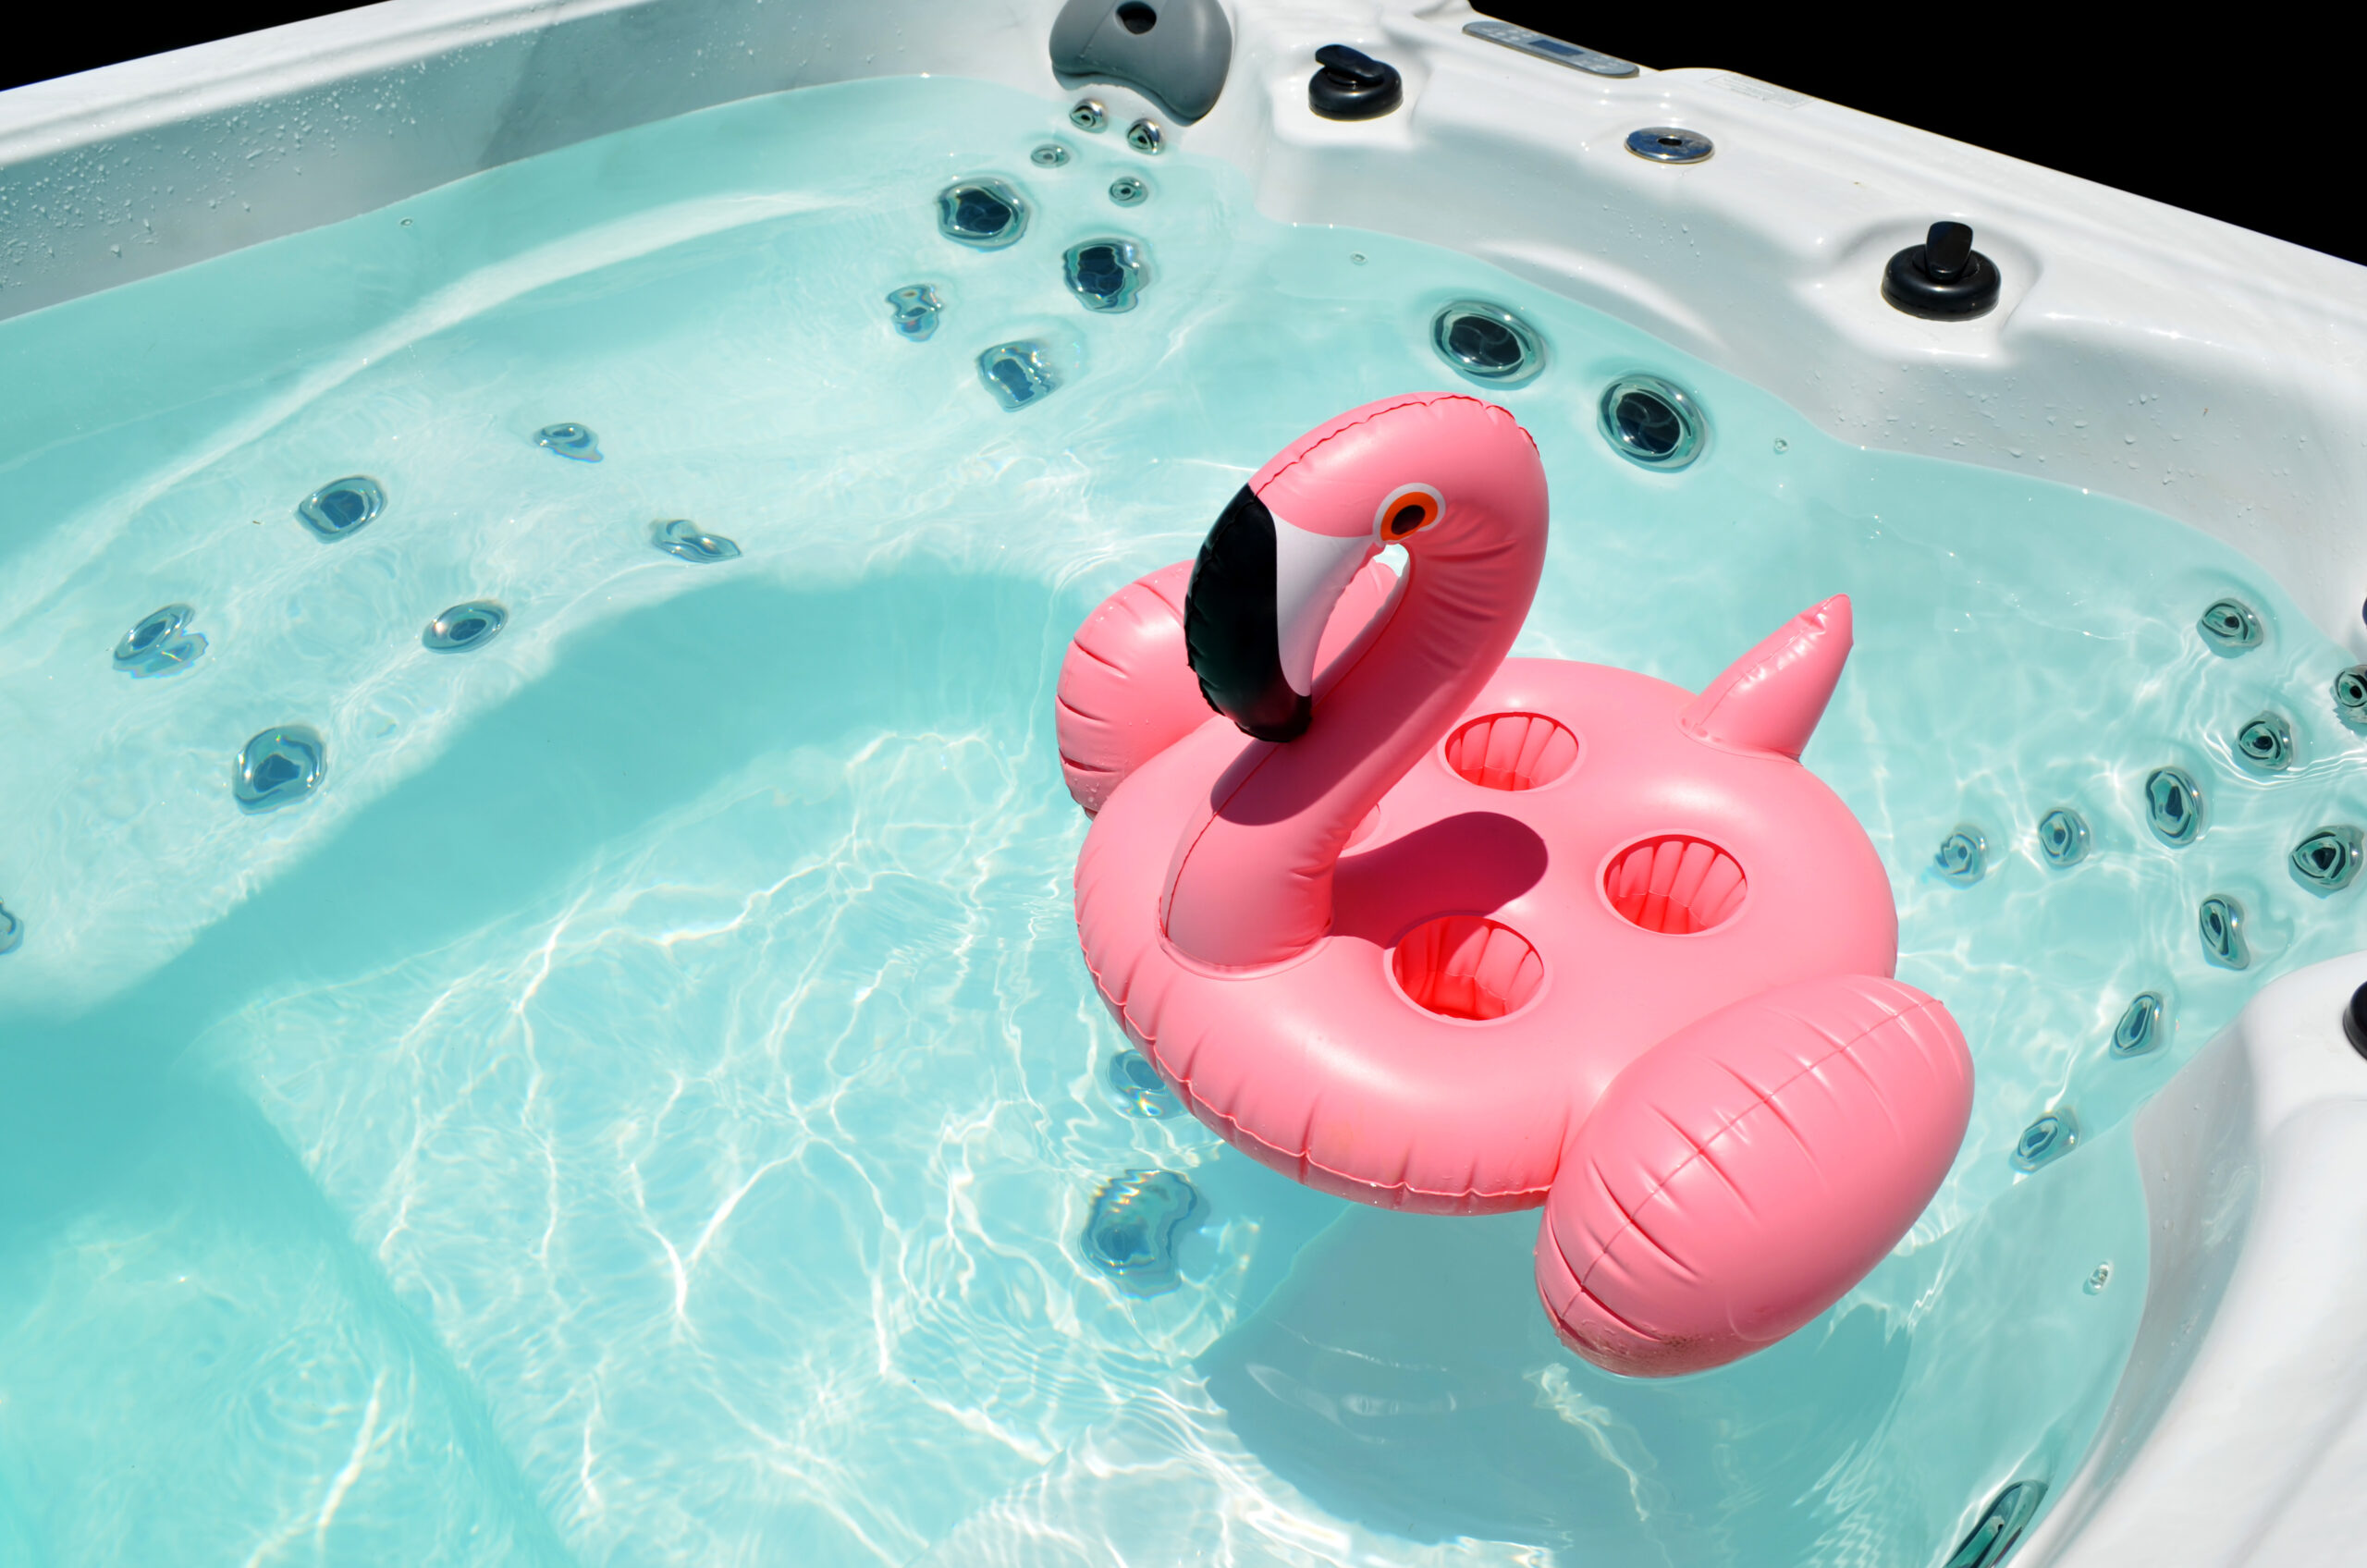 Hot tub with a flamingo floatie in it.